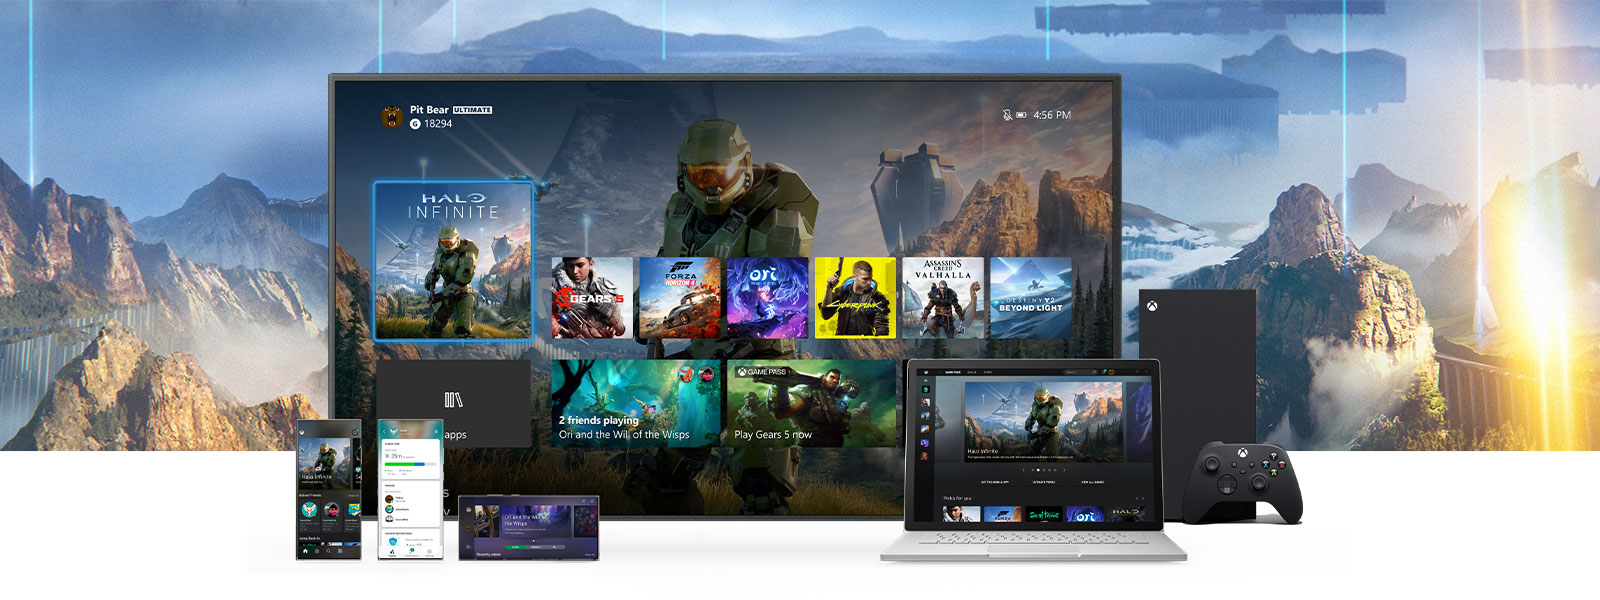 The Xbox dashboard is displayed on a TV next to an Xbox Series X. Additional devices such as a PC and mobile devices sit in front of the TV.